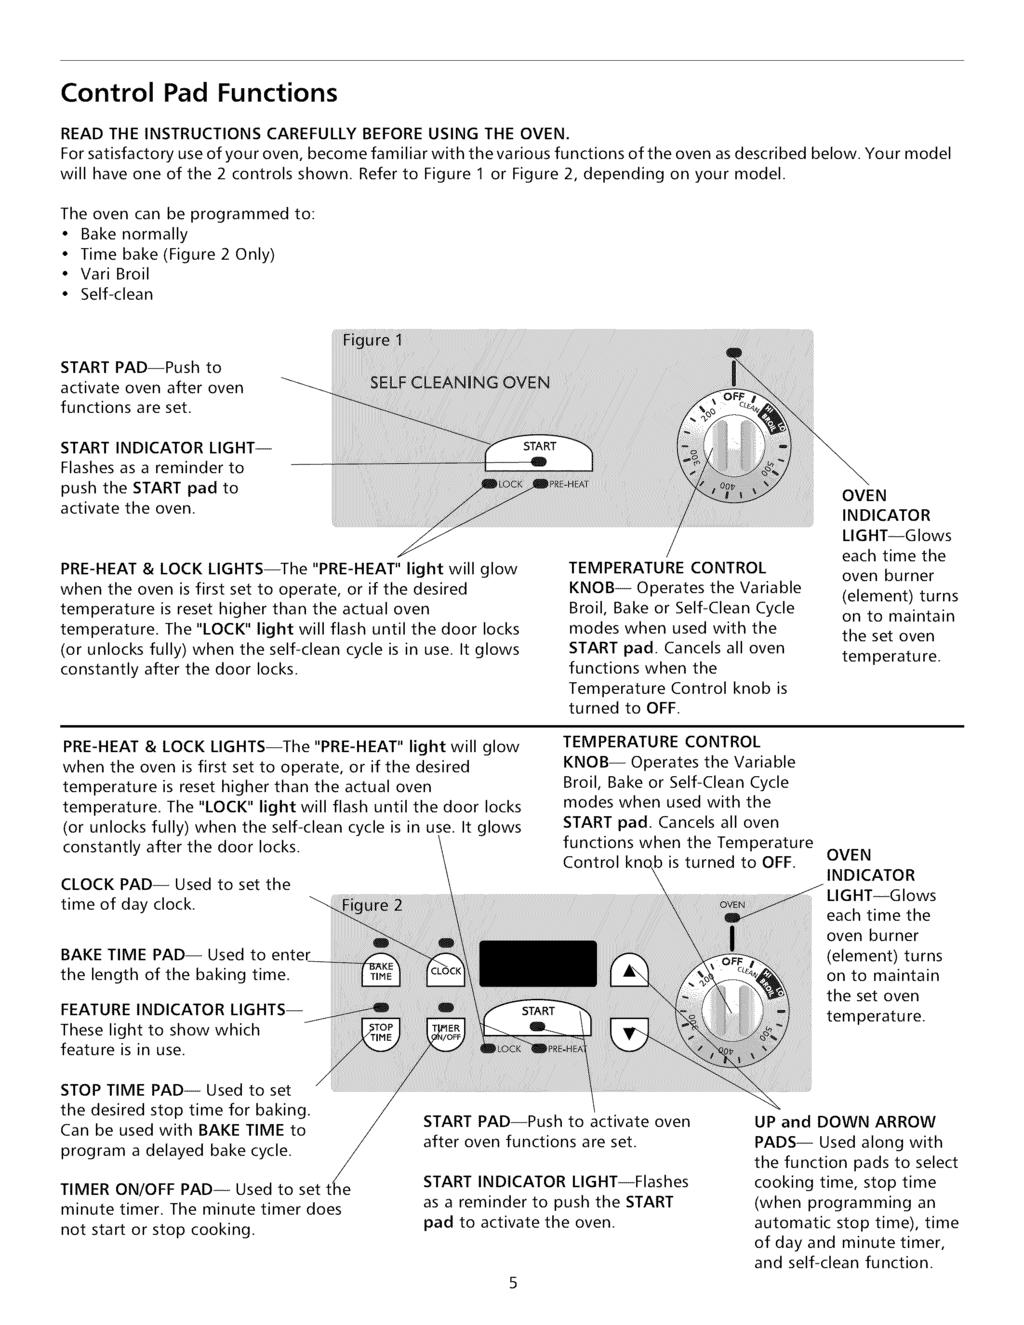 Control Pad Functions READ THE INSTRUCTIONS CAREFULLY BEFORE USING THE OVEN. For satisfactory use of your oven, become familiar with the various functions of the oven as described below.